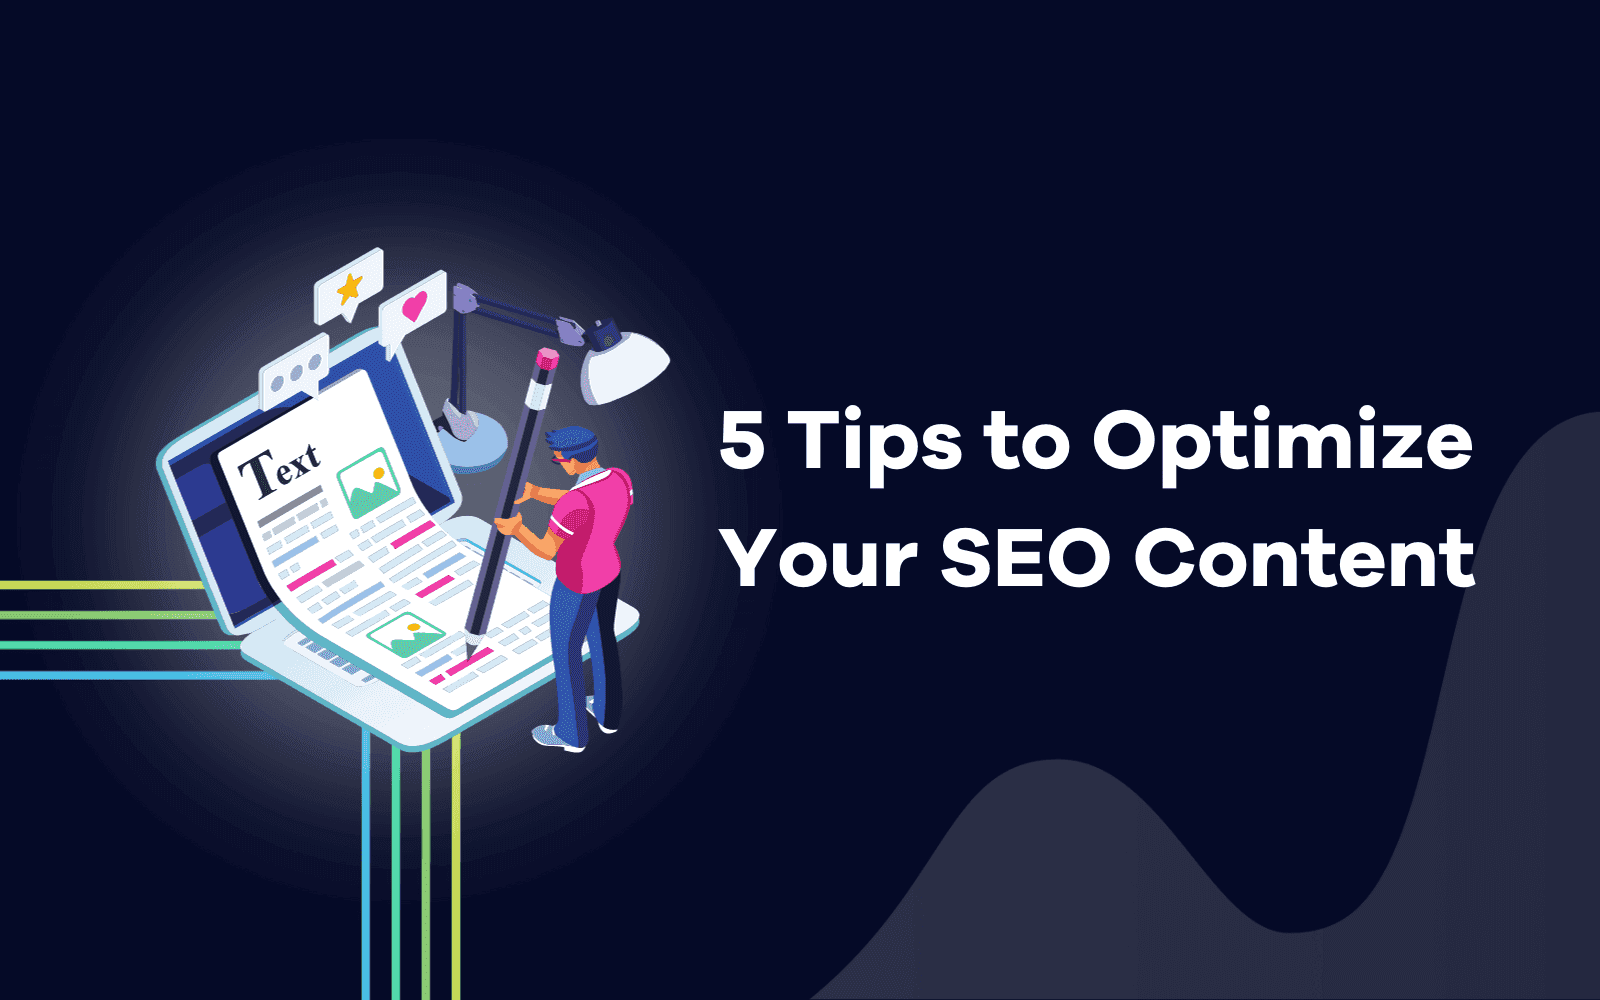 5 Tips to Optimize Your SEO Content